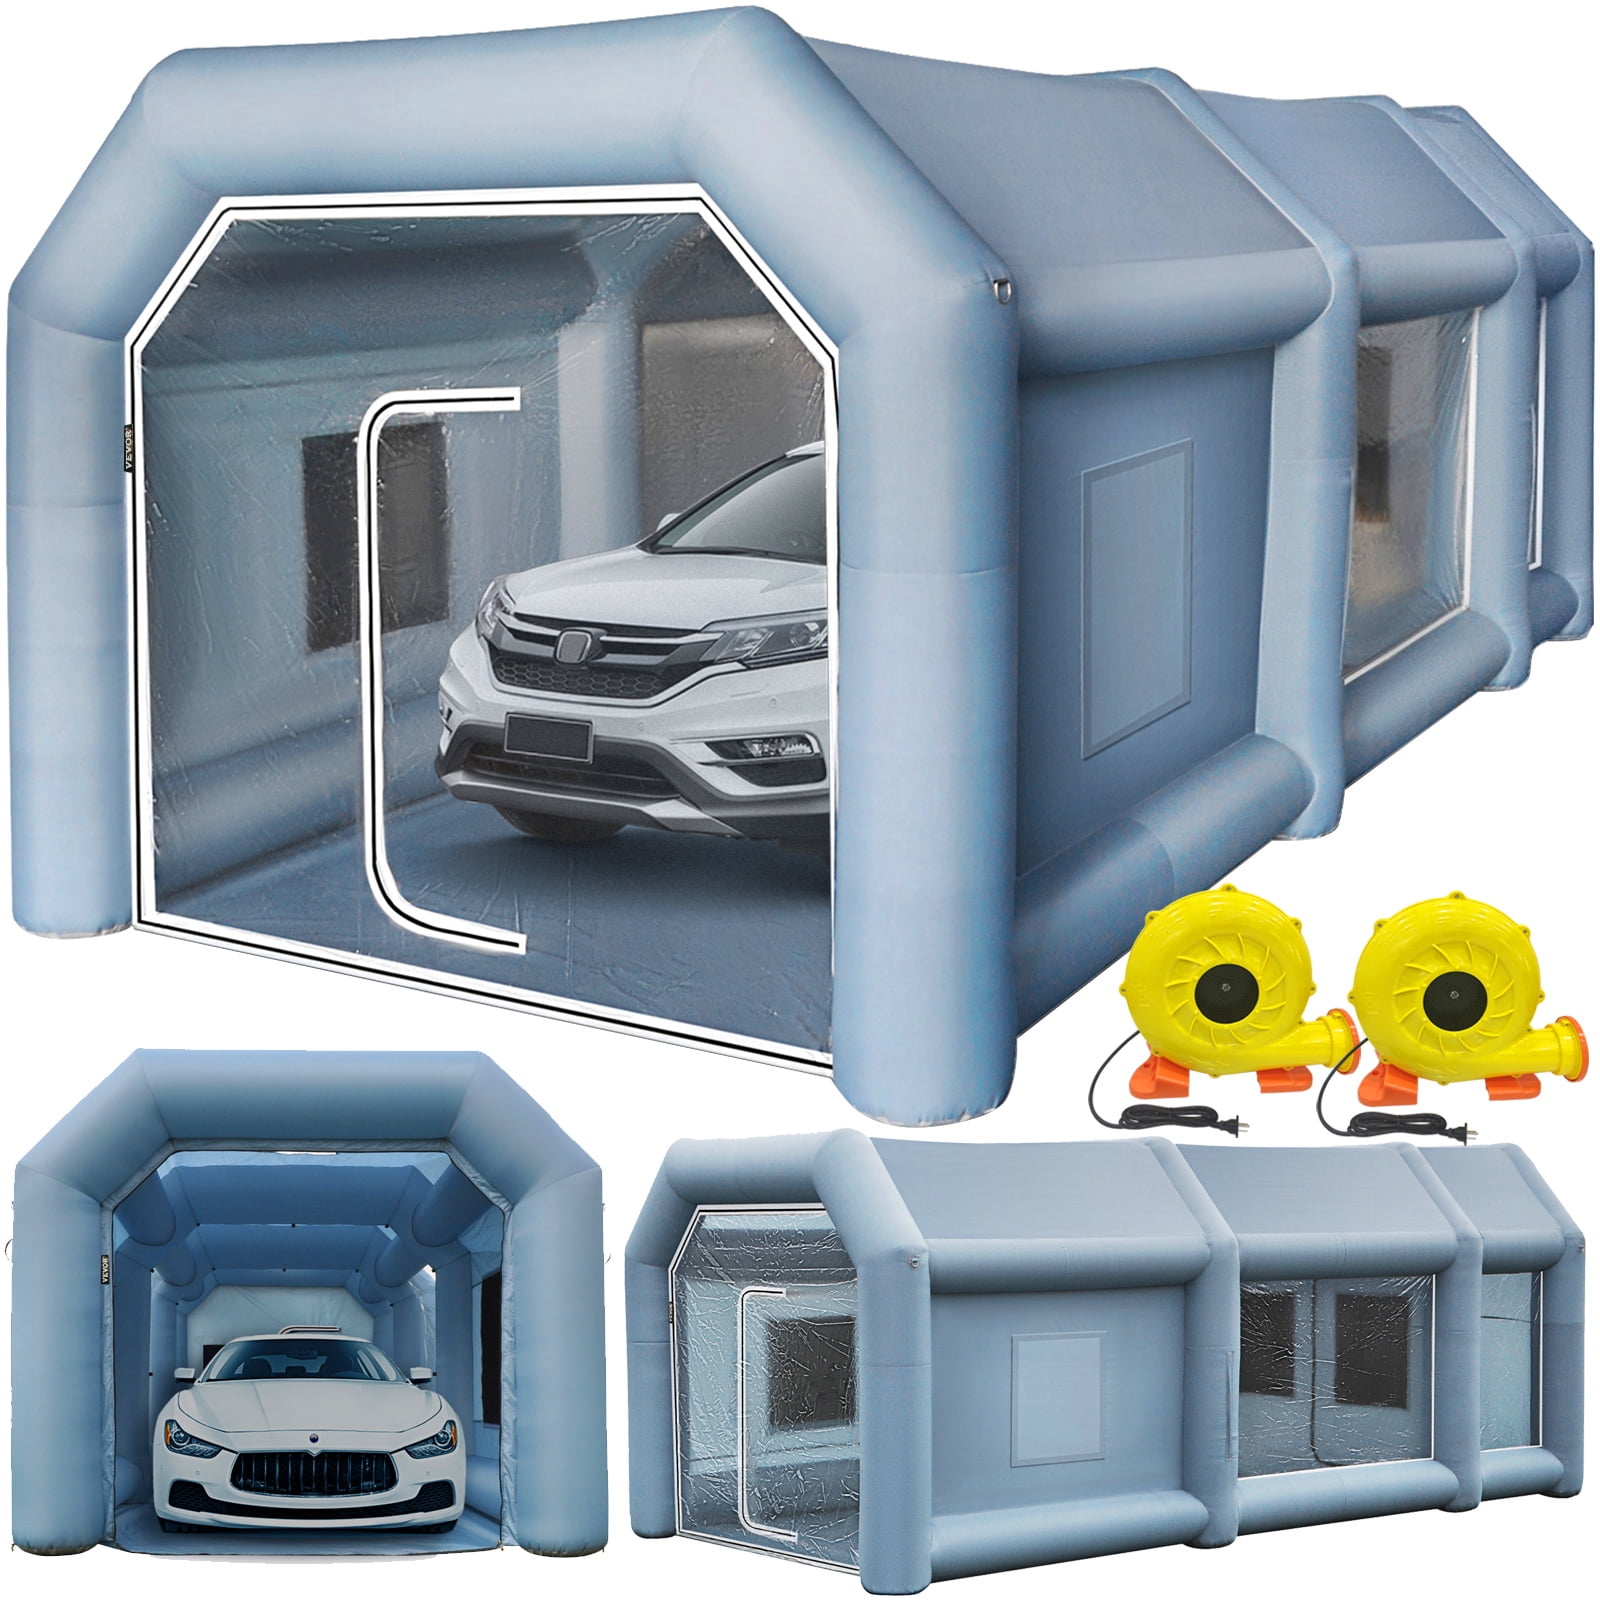 BENTISM Inflatable Paint Booth 26x15x11ft Inflatable Spray Booth Car Paint  Tent with 750W+950W Filter System Blower 